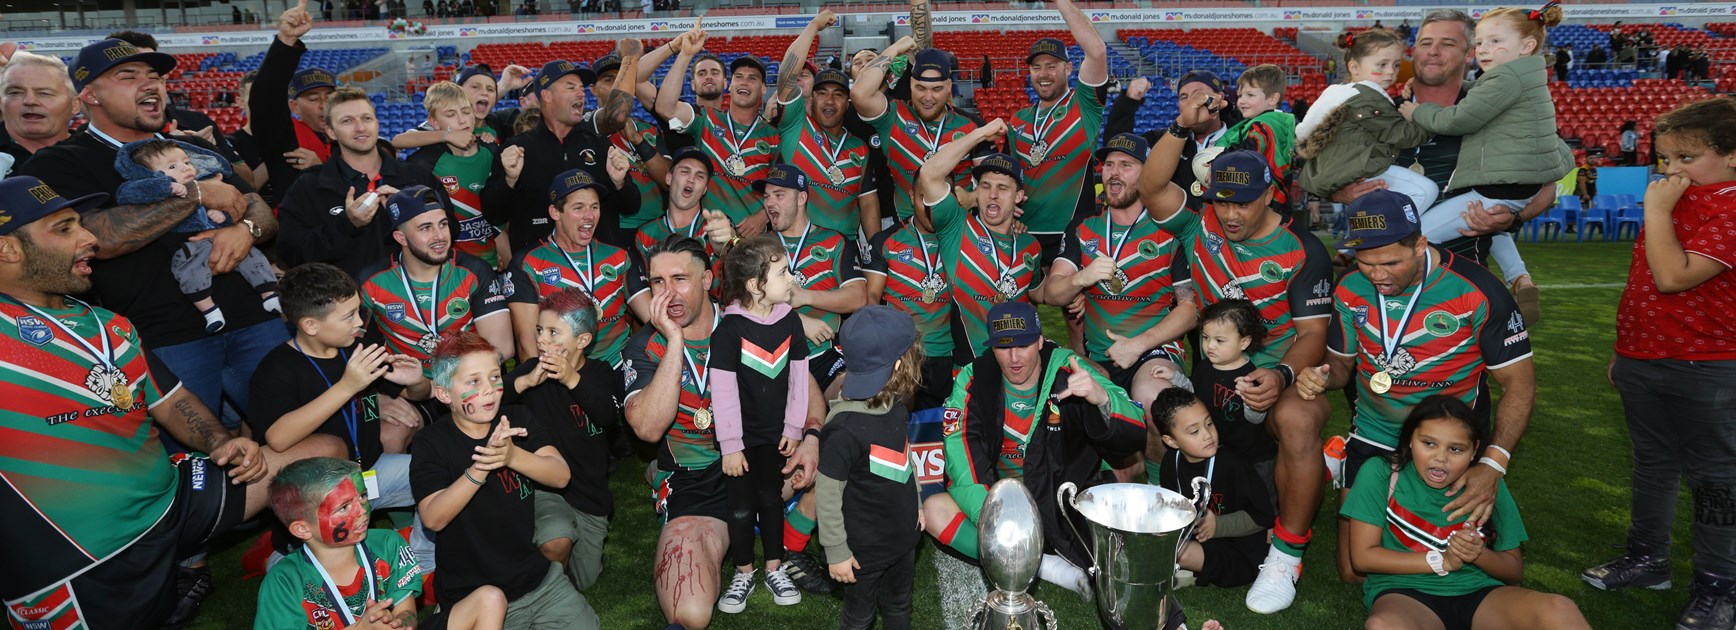 Wests crowned champions after emphatic GF win